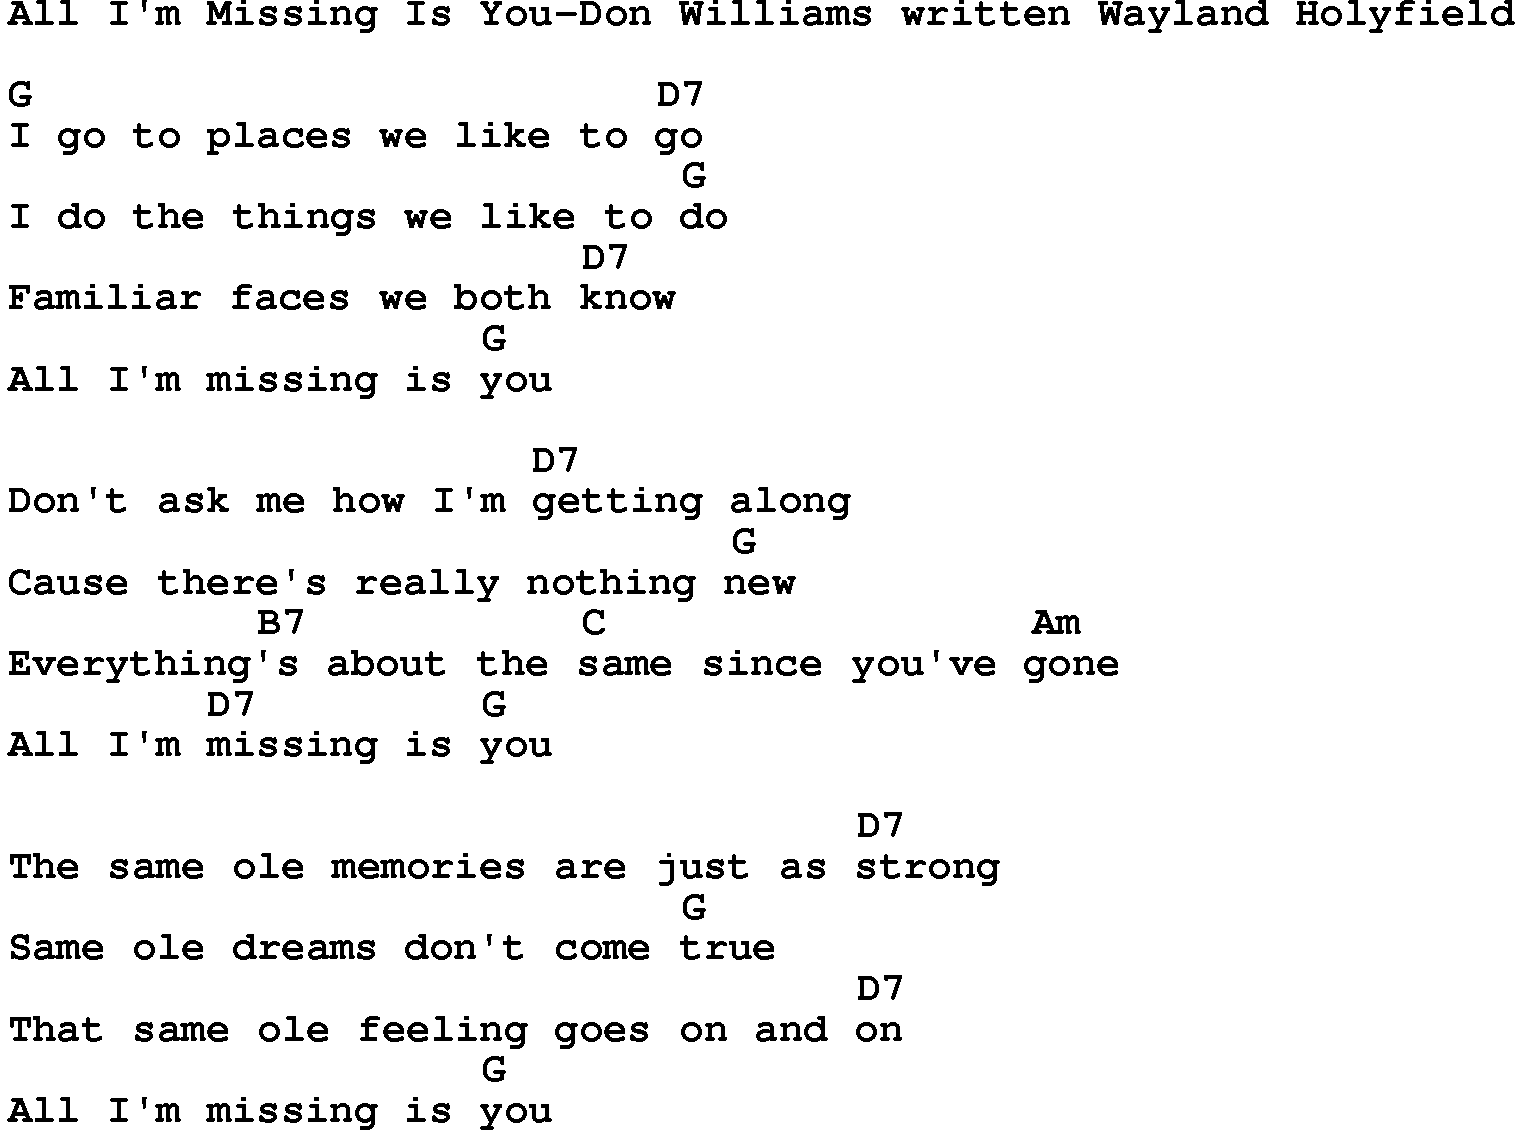 Country music song: All I'm Missing Is You-Don Williams Written Wayland Holyfield lyrics and chords